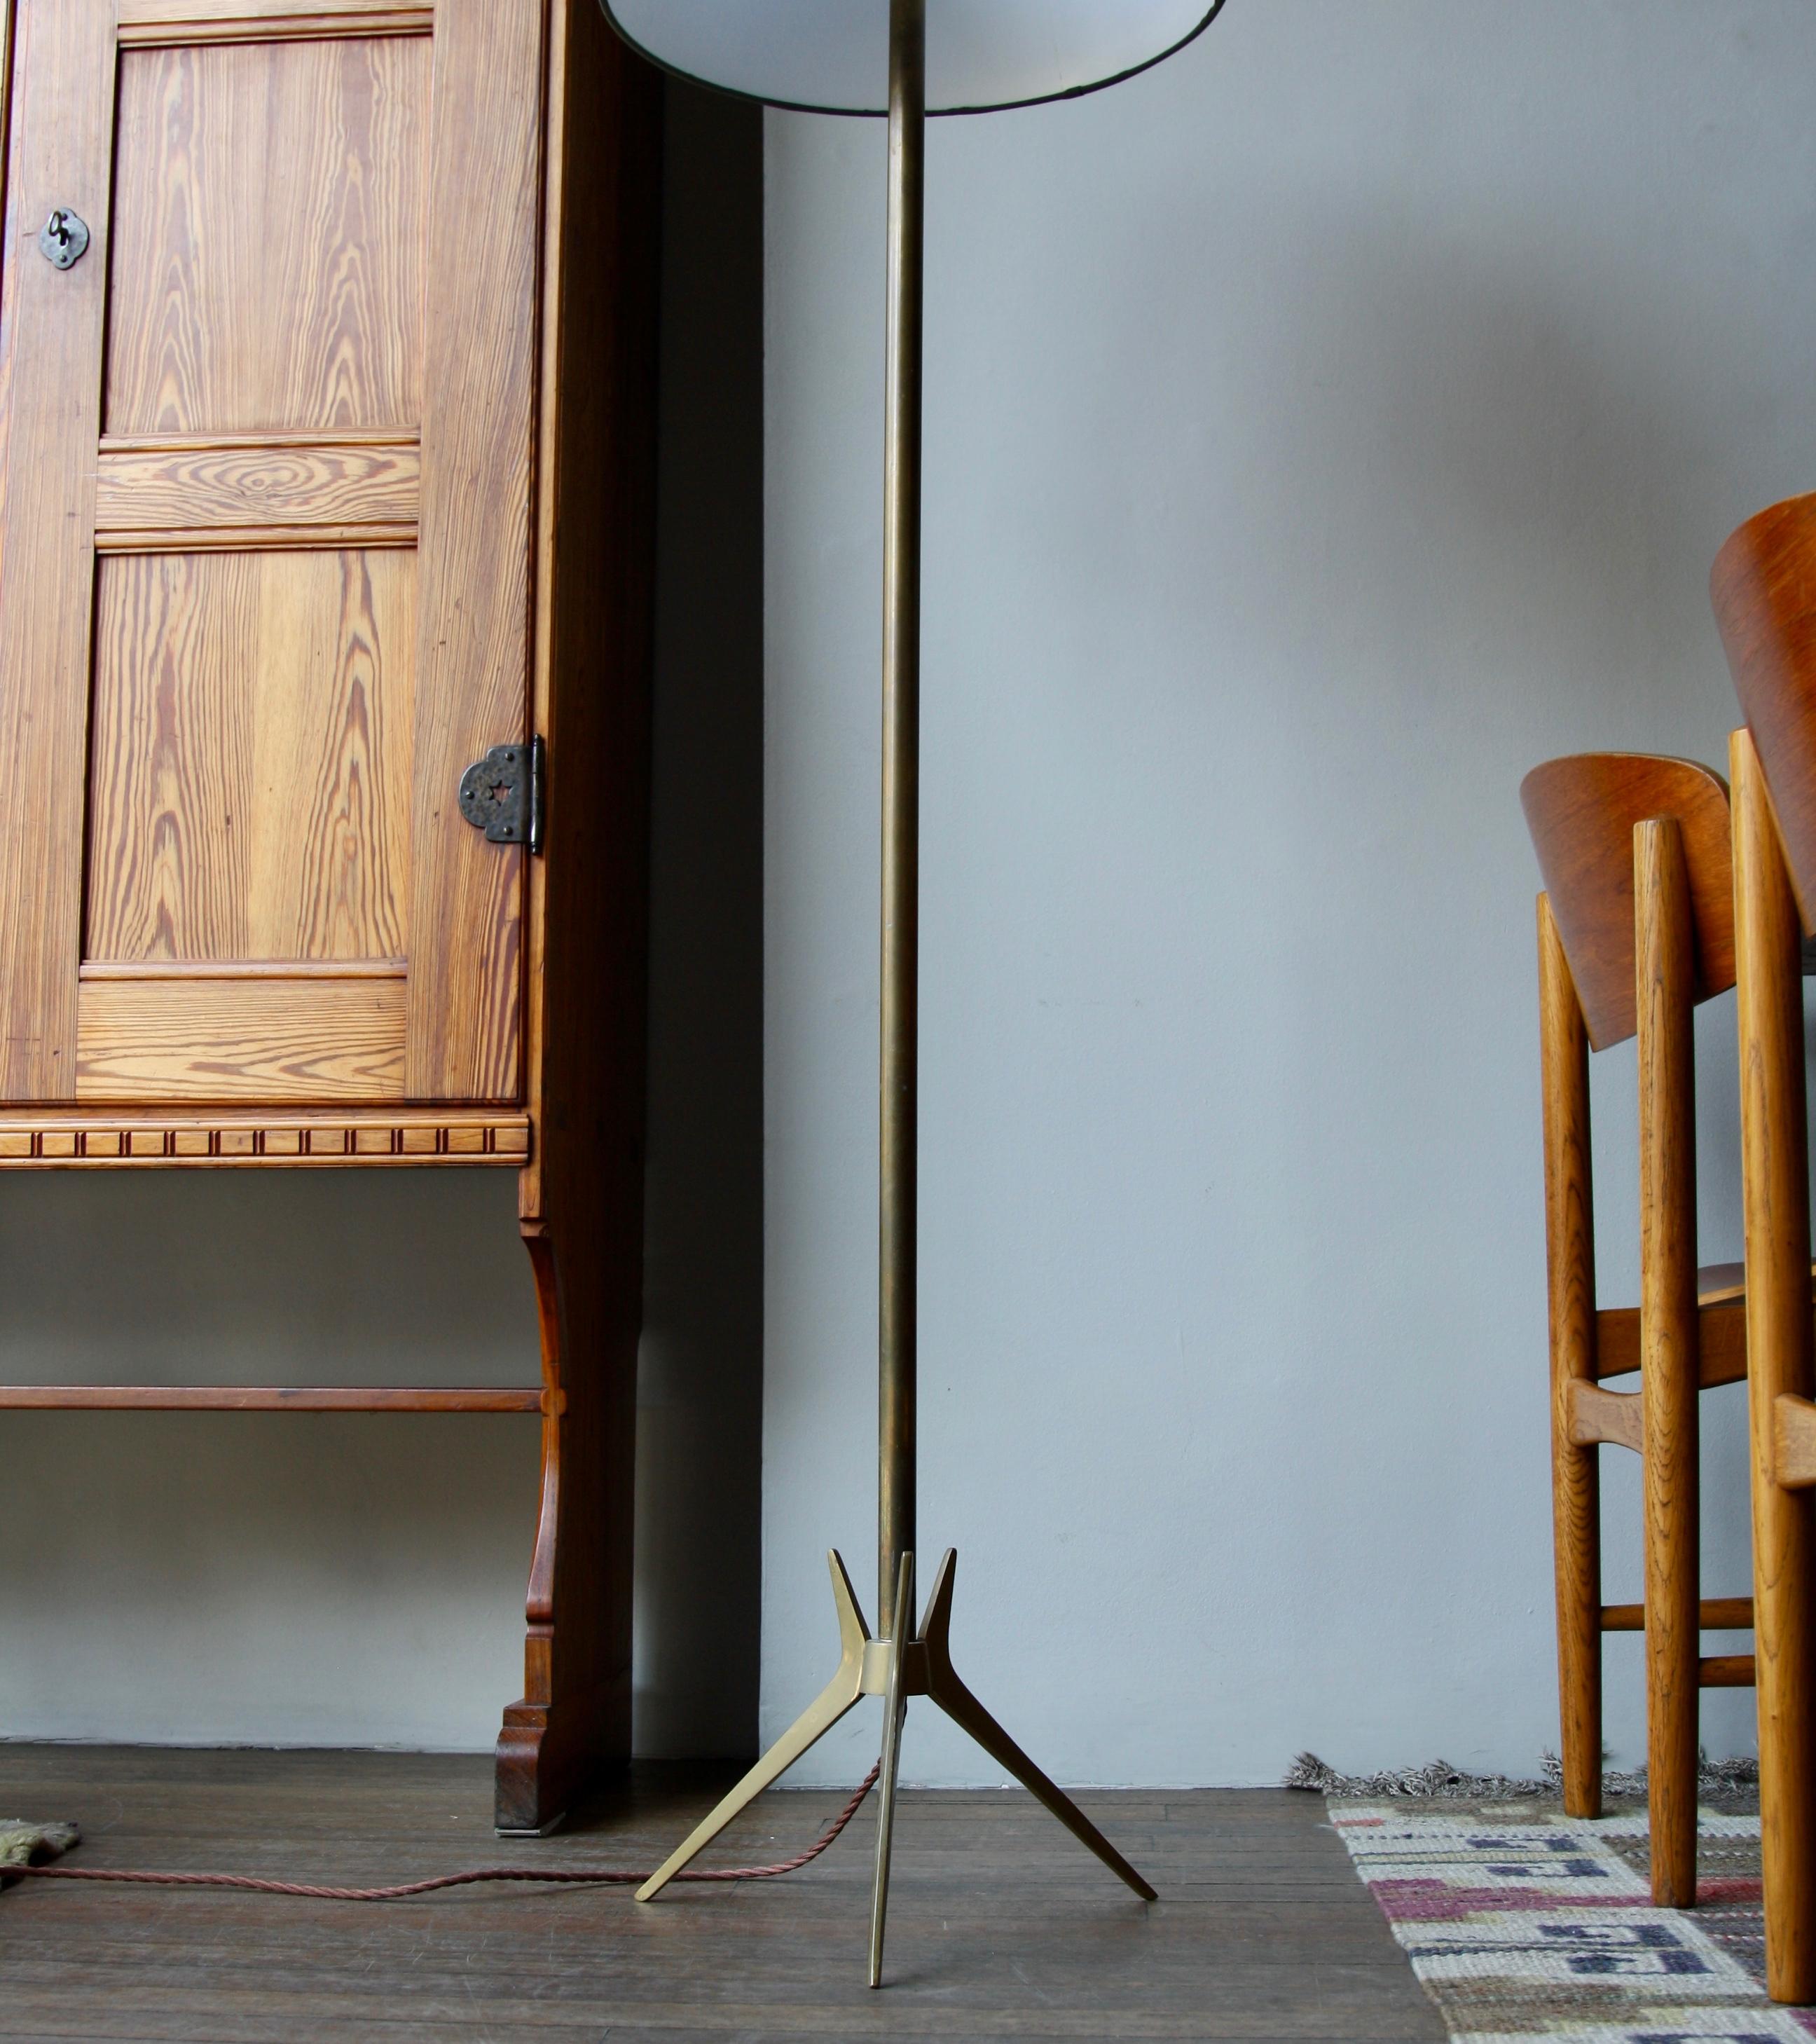 A vintage floor light designed and made in Denmark around 1950. The lamp is made entirely of brass and its form is as simple as its material.
The light is made up of four simple sections; an idiosyncratic 'Crow’s foot' base, a thick central shaft,